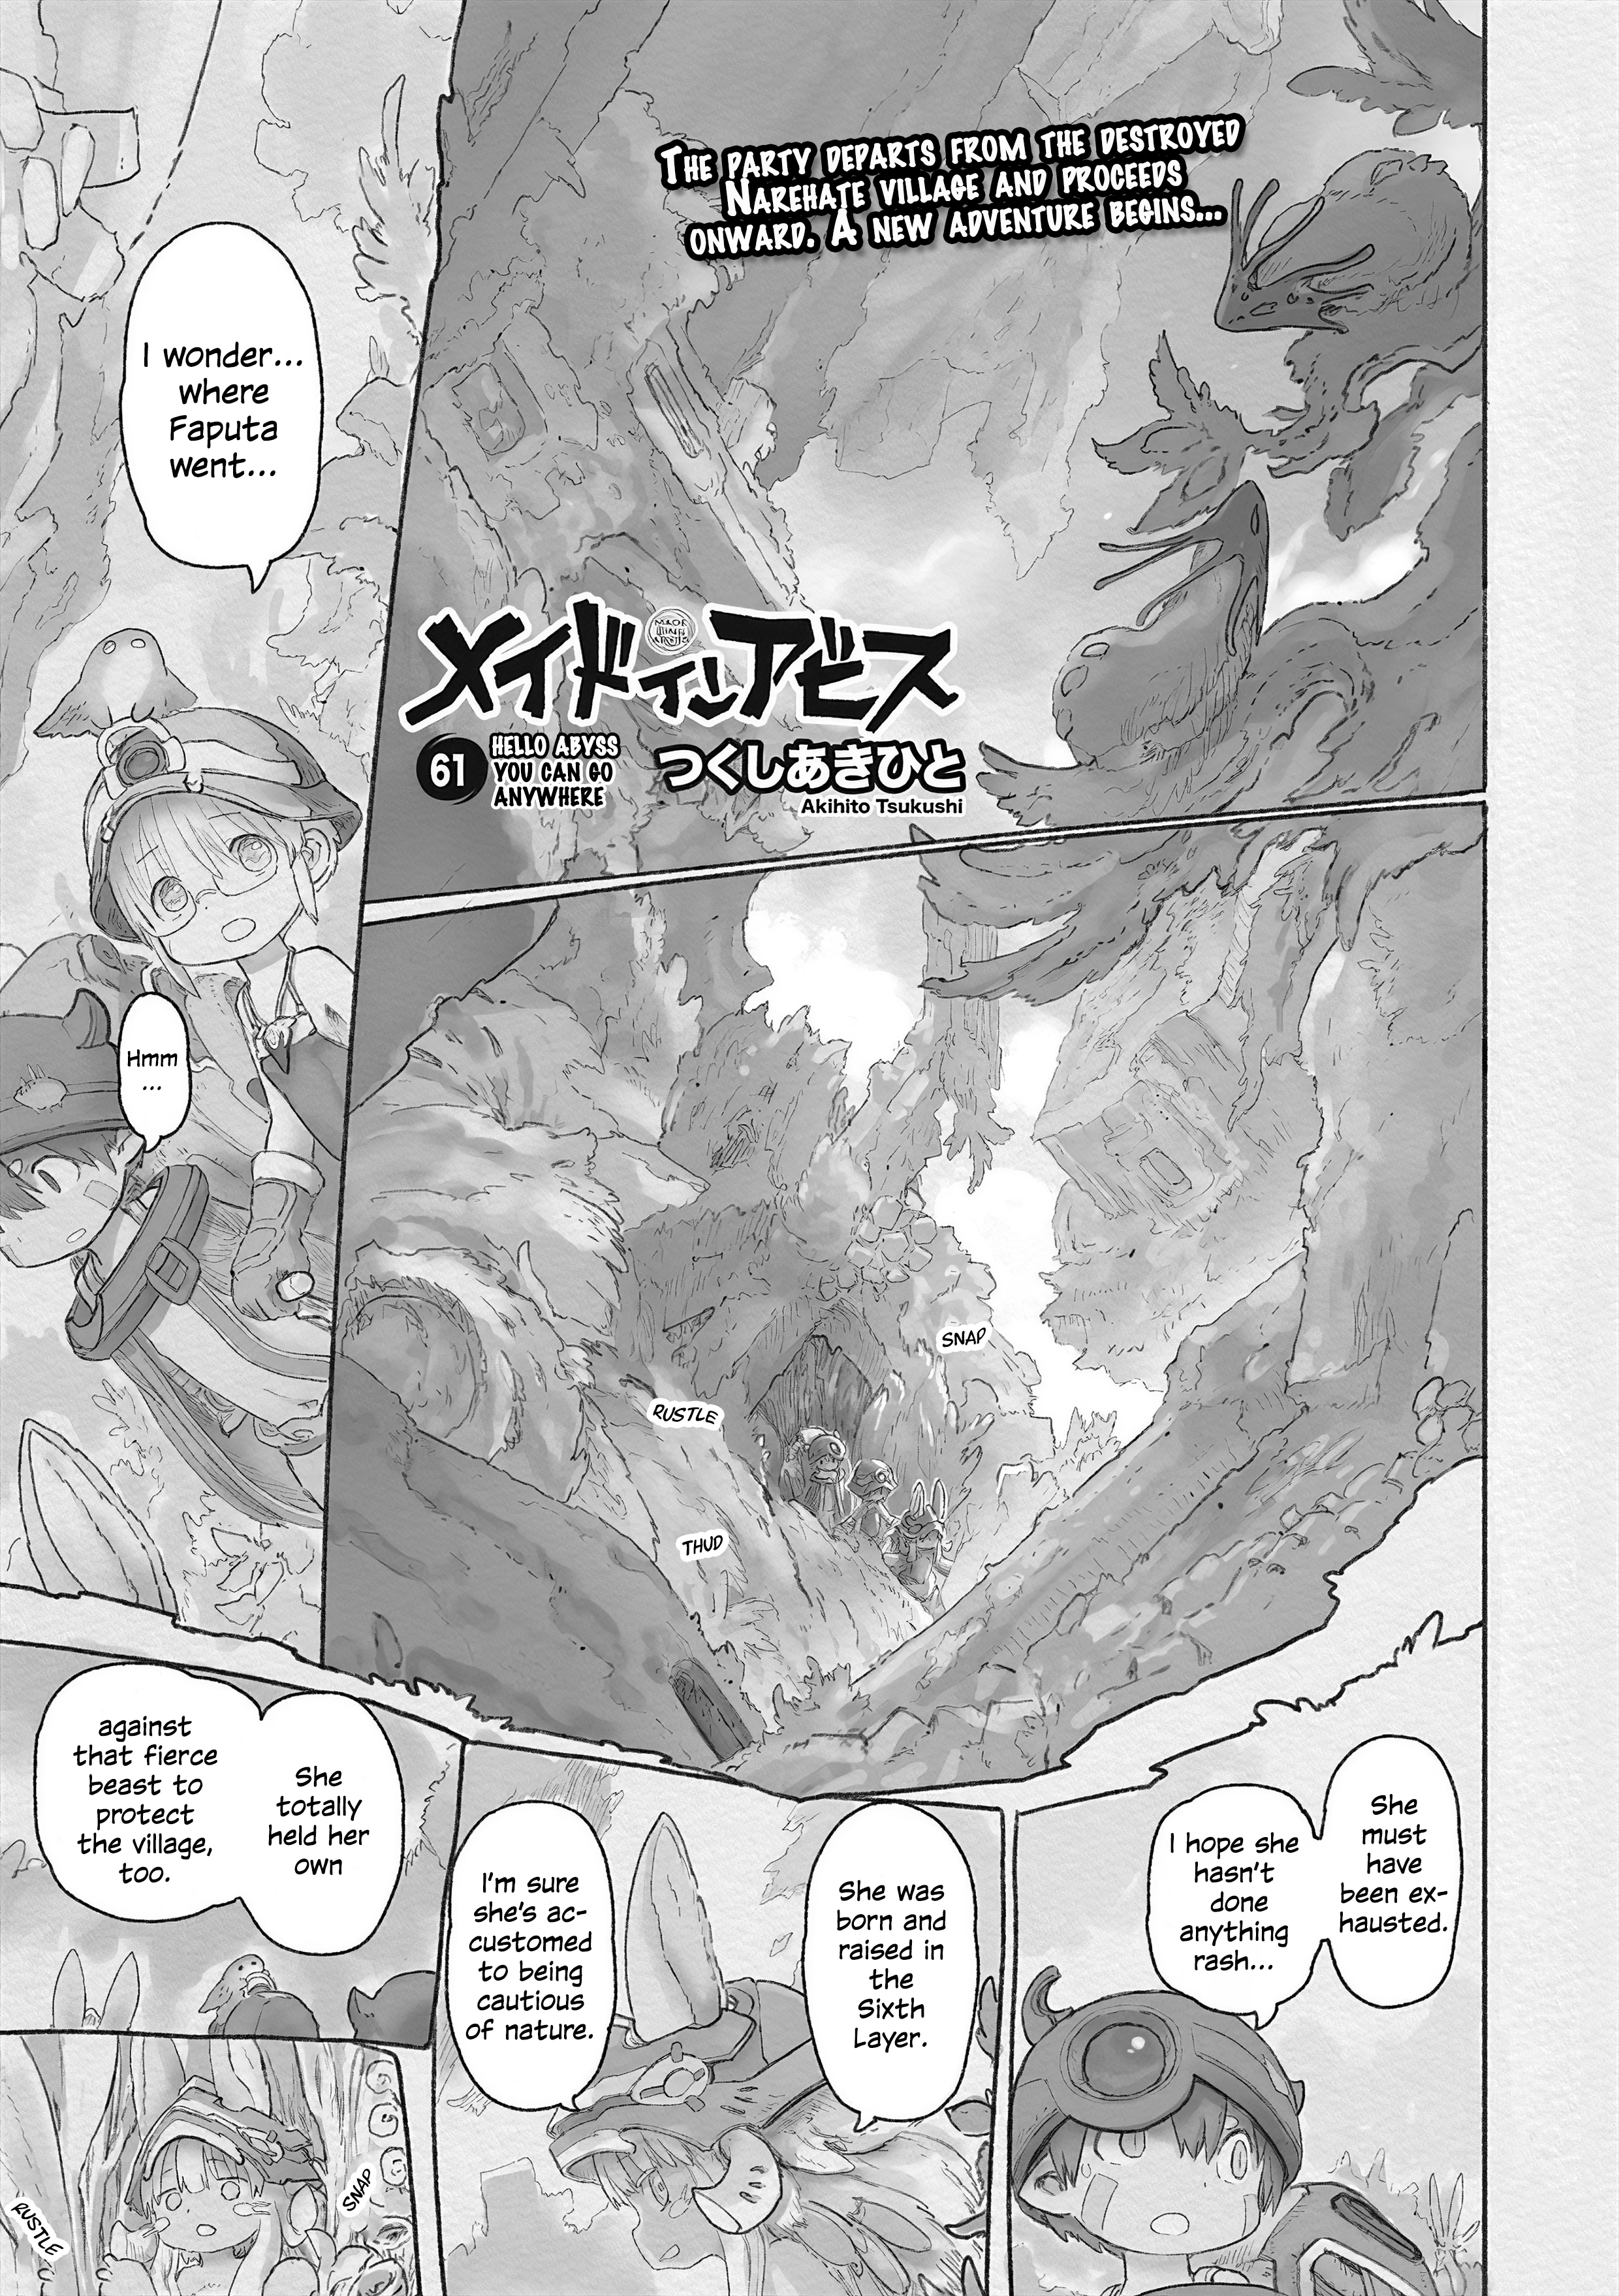 Chapters, Made in Abyss Wiki